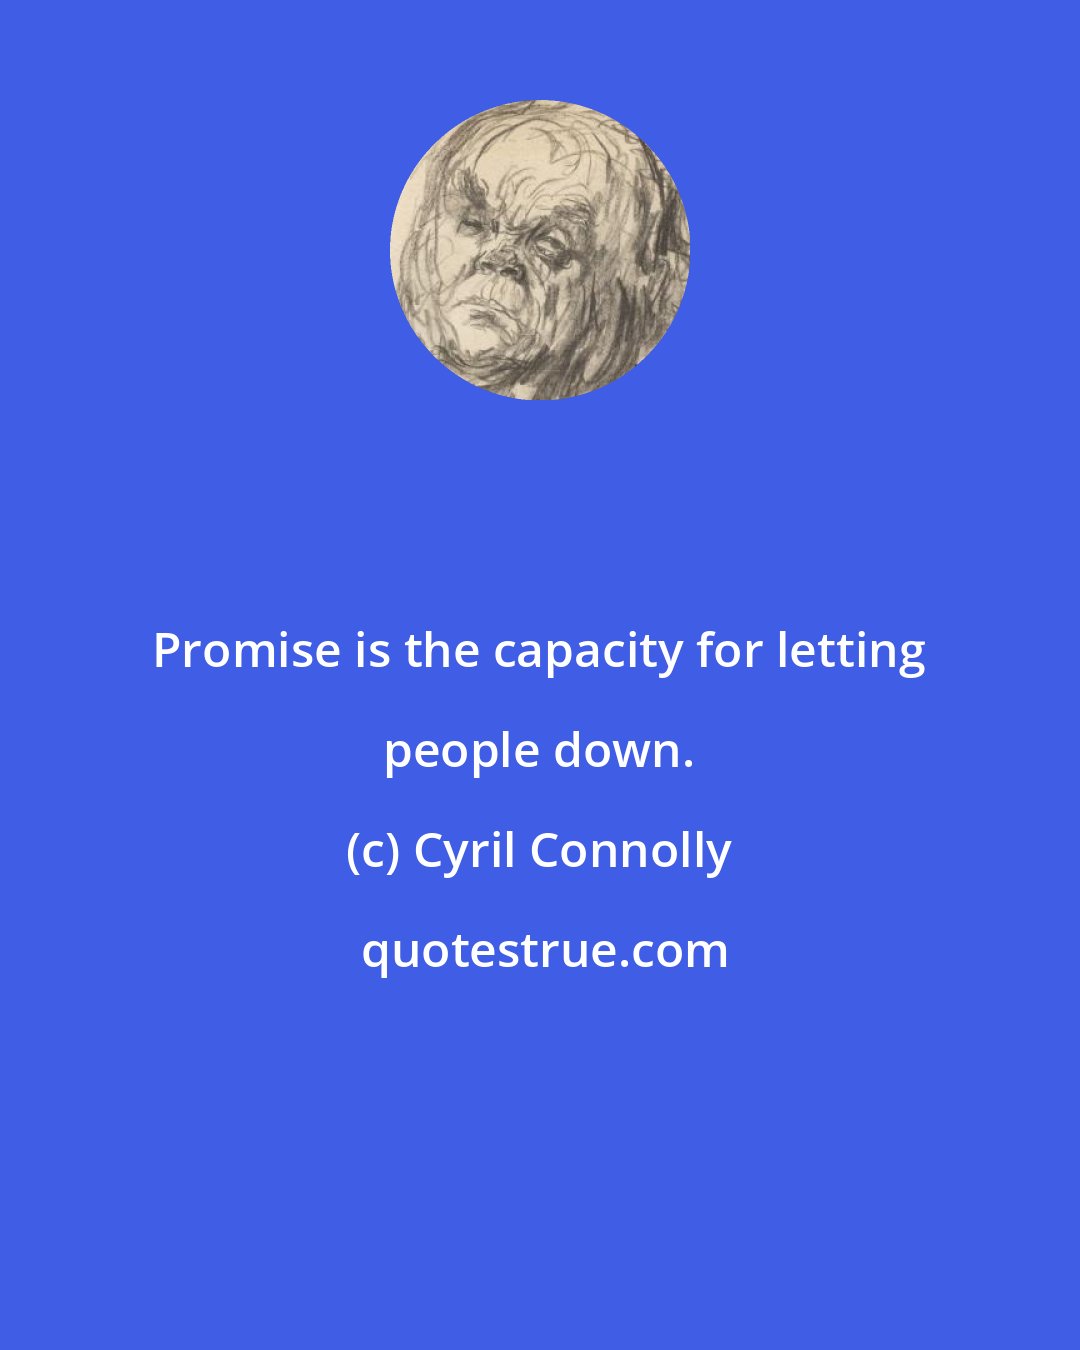 Cyril Connolly: Promise is the capacity for letting people down.